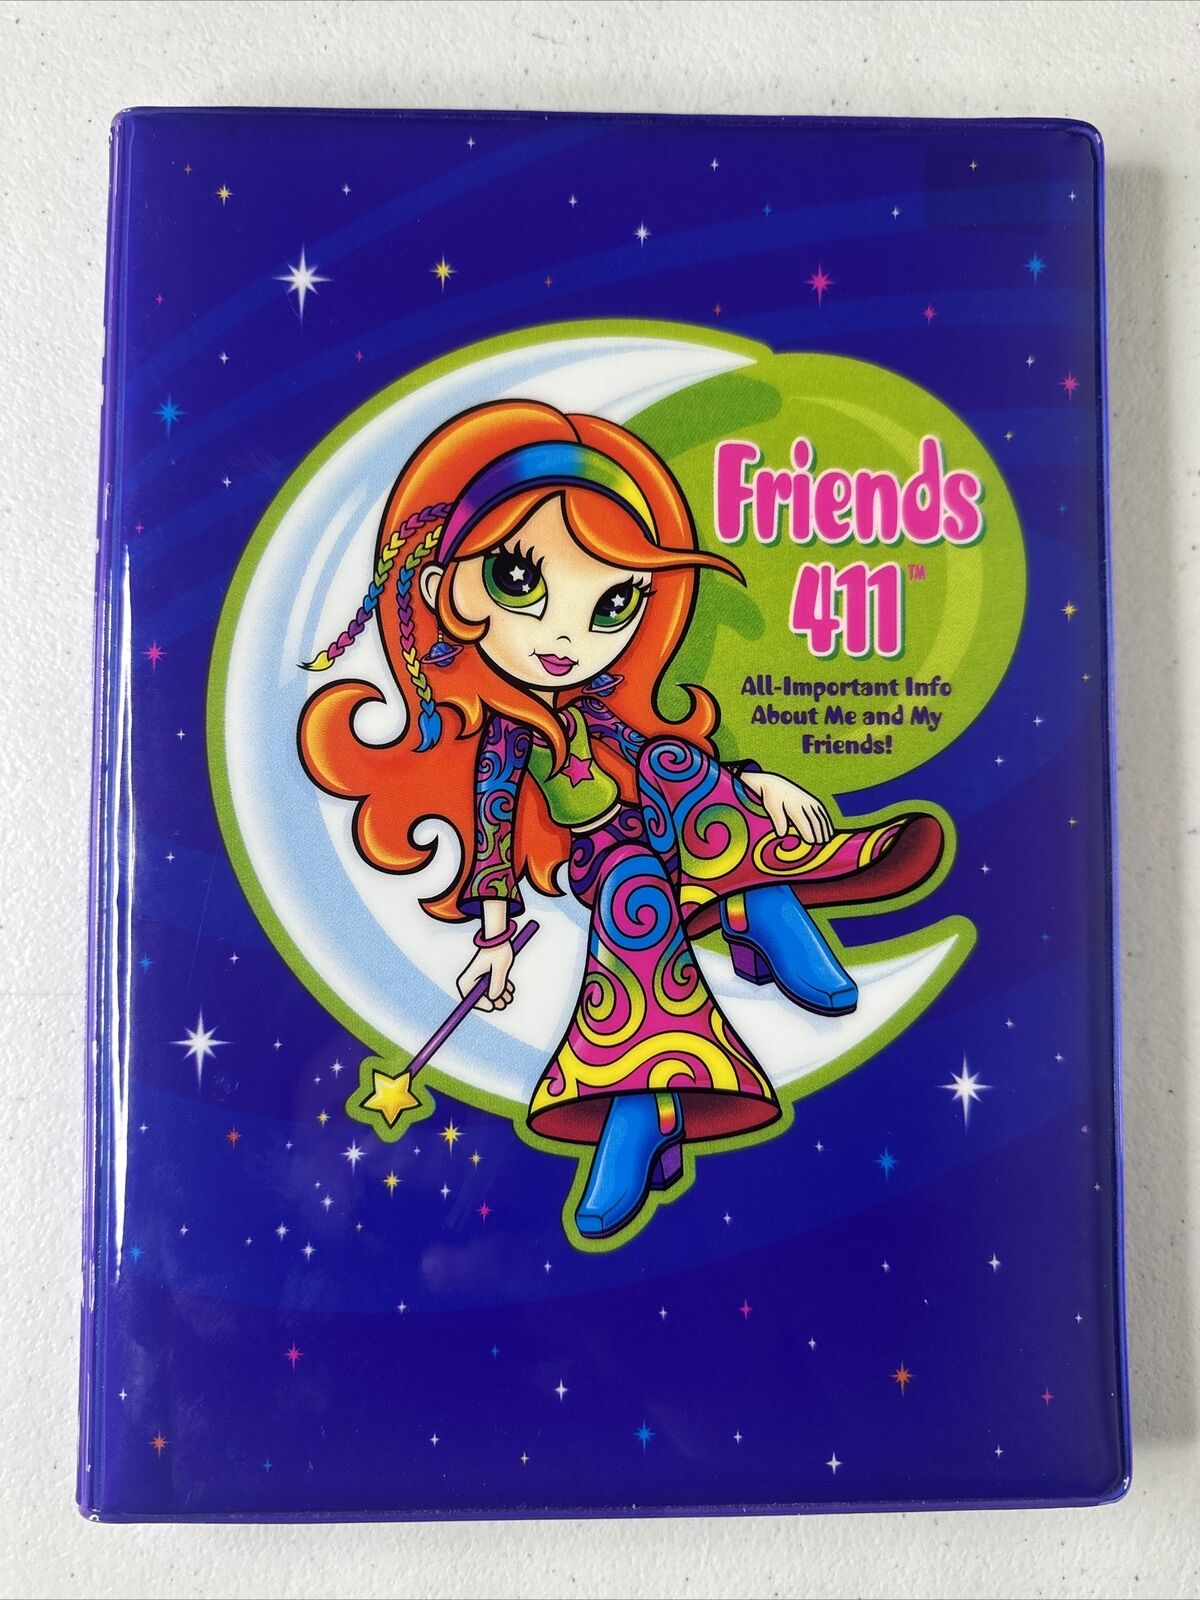 Vintage Mint Lisa Frank Friends 411 Notebook - Rare Collectible New Condition